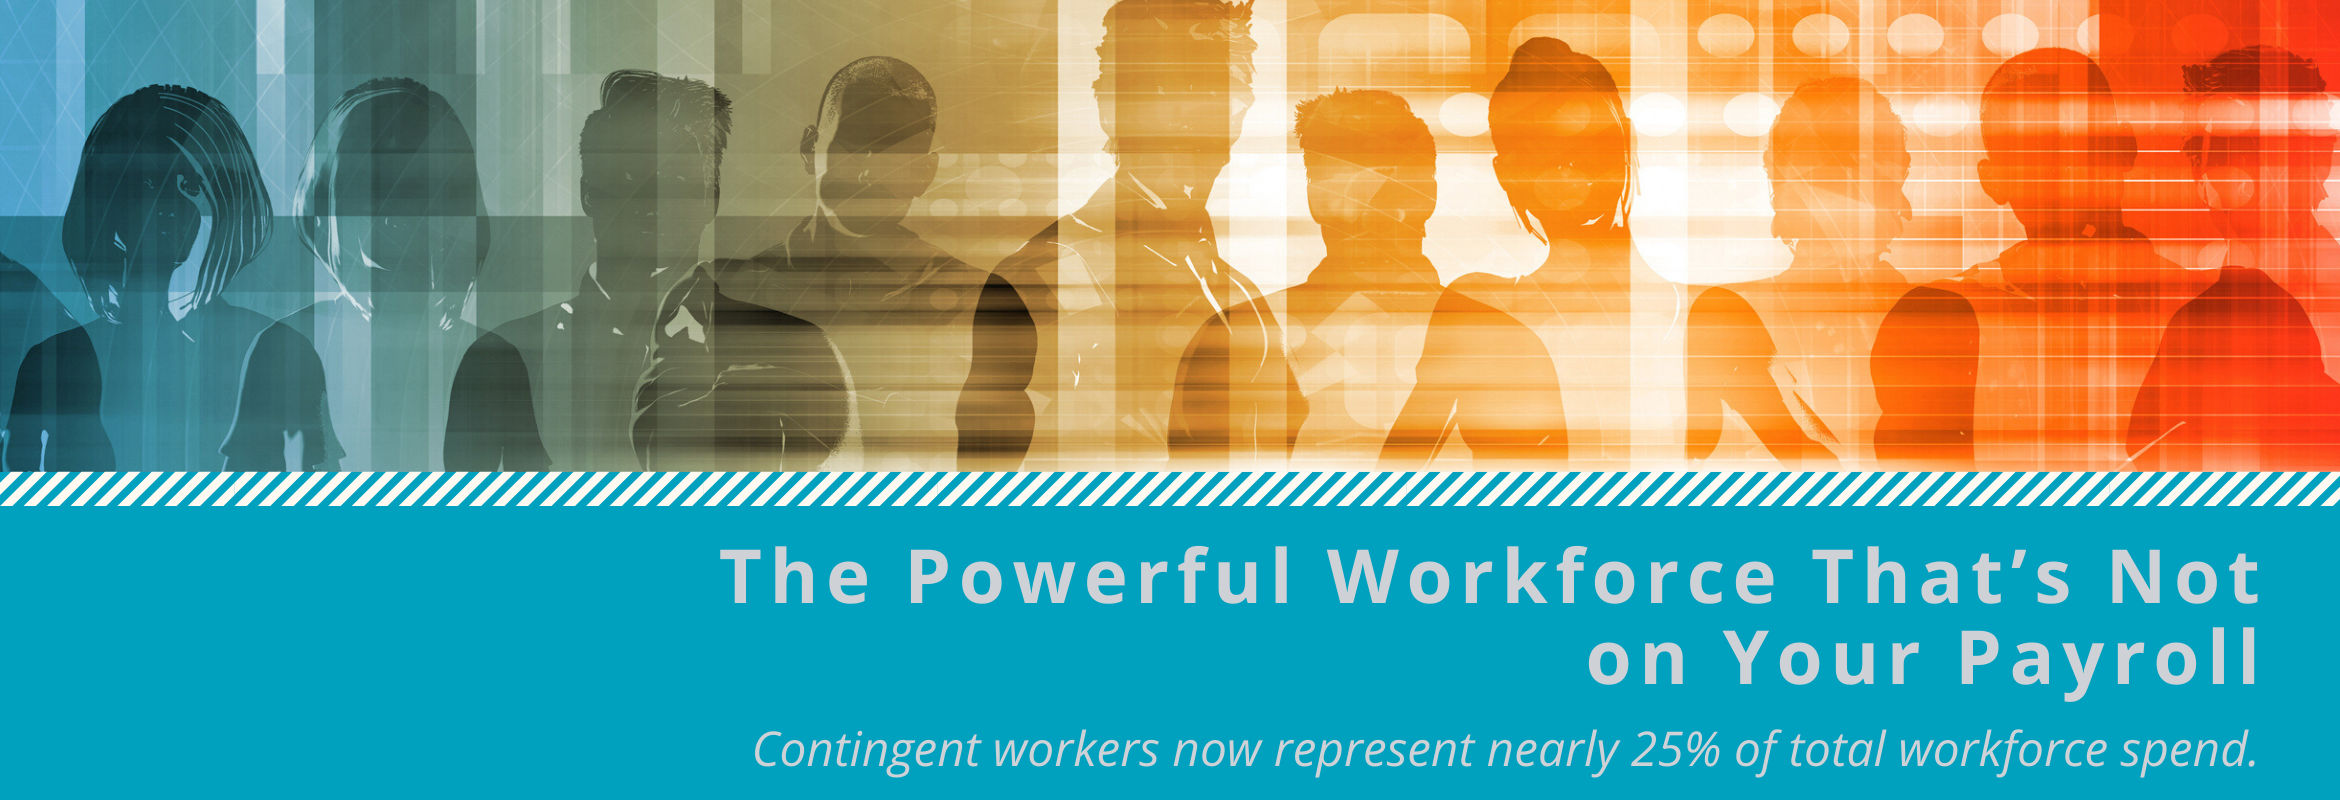 Contingent workers now represent nearly 25 percent of total workforce spend.